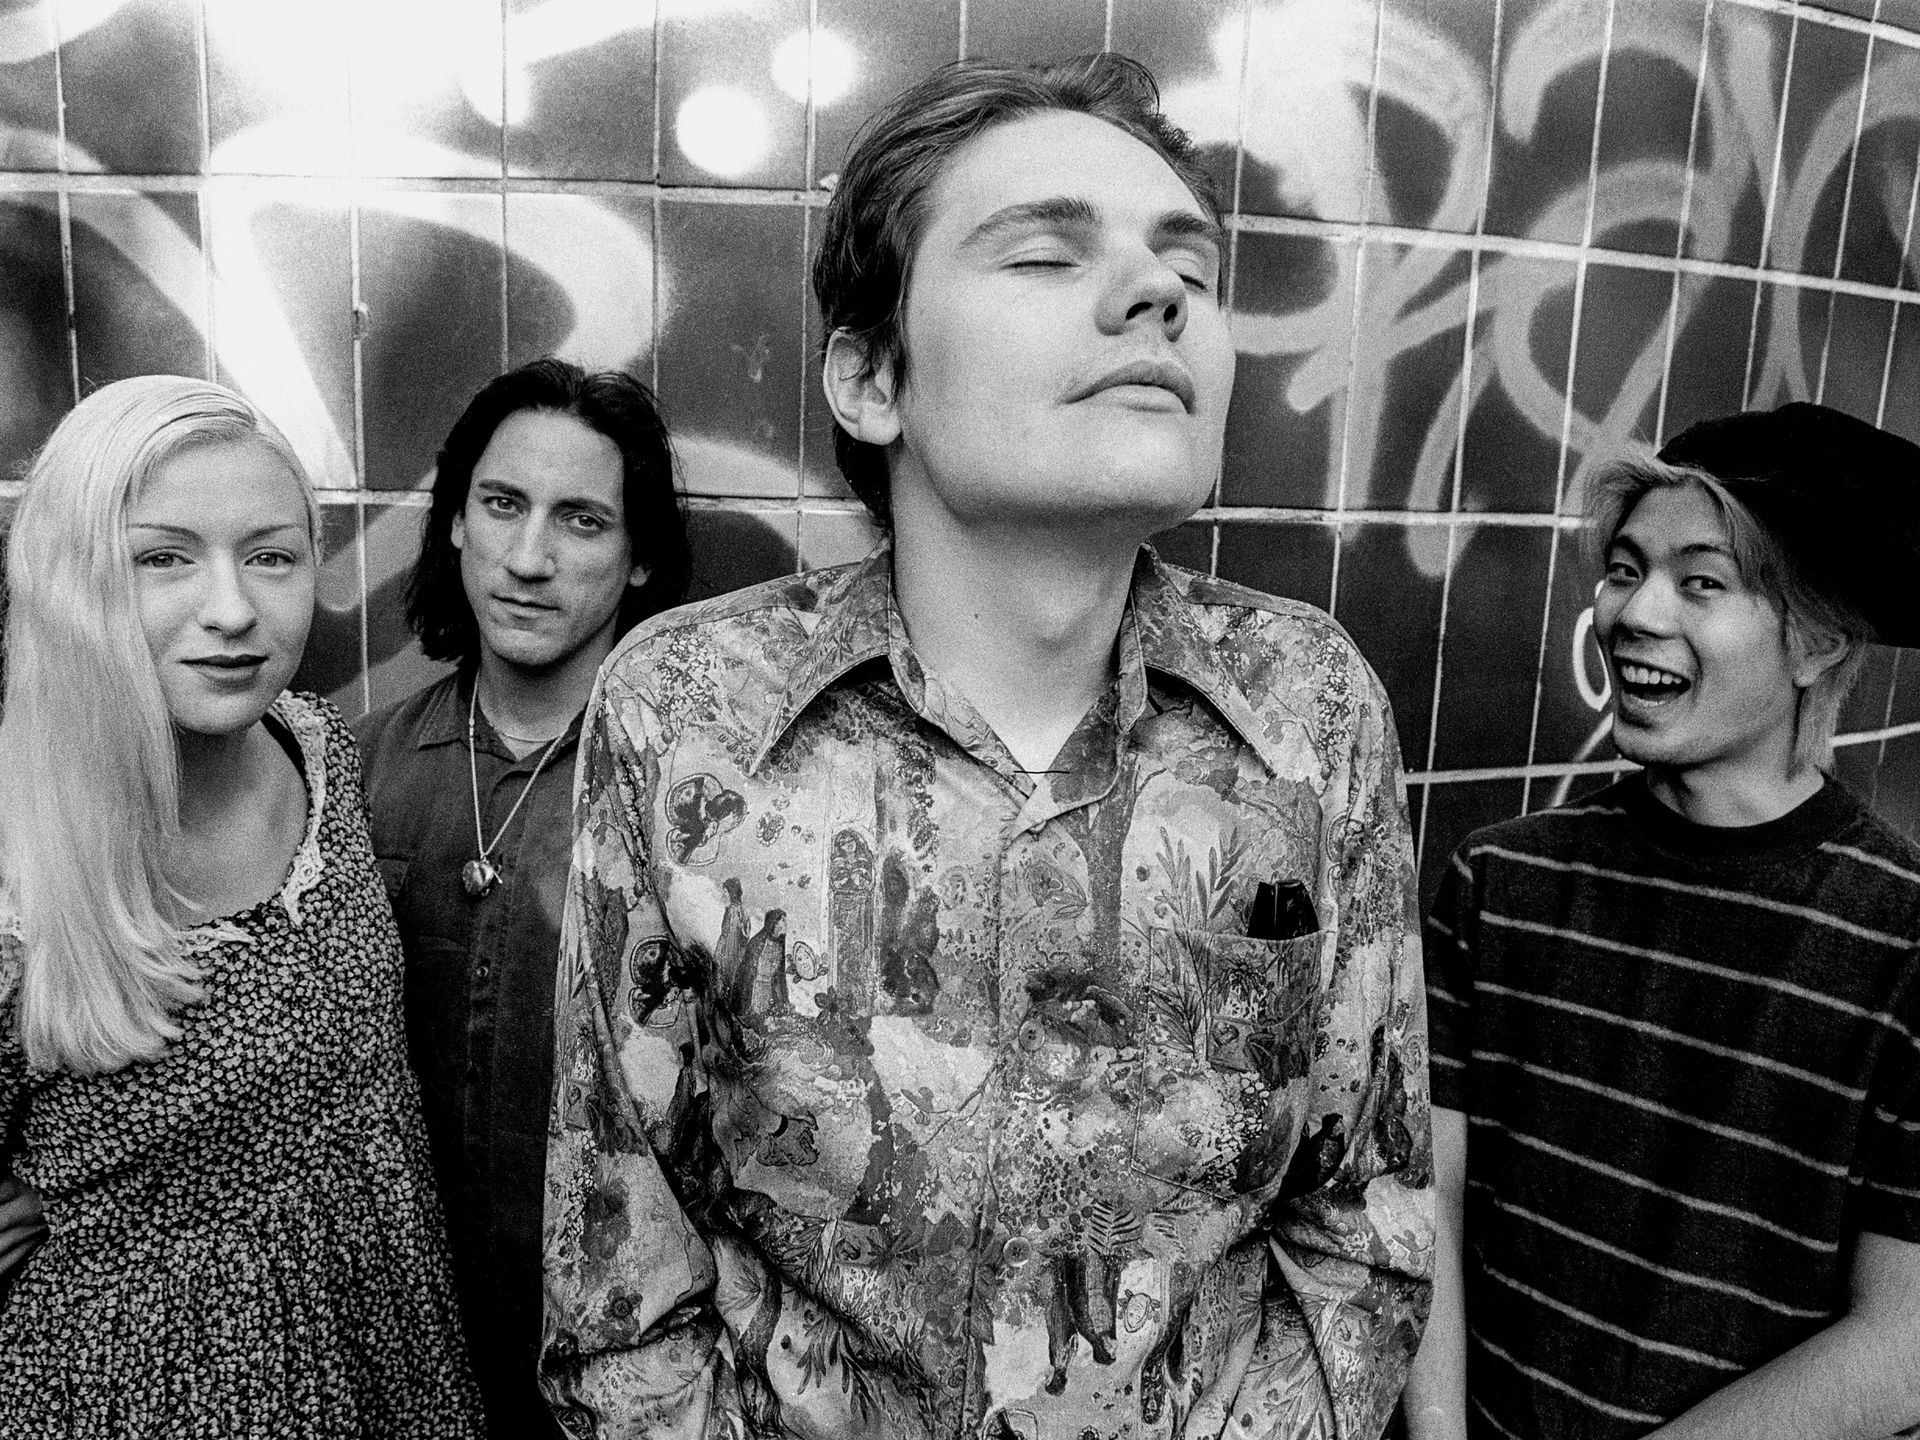 Smashing Pumpkins to perform 2 acoustic shows in Highland Park - Axios  Chicago